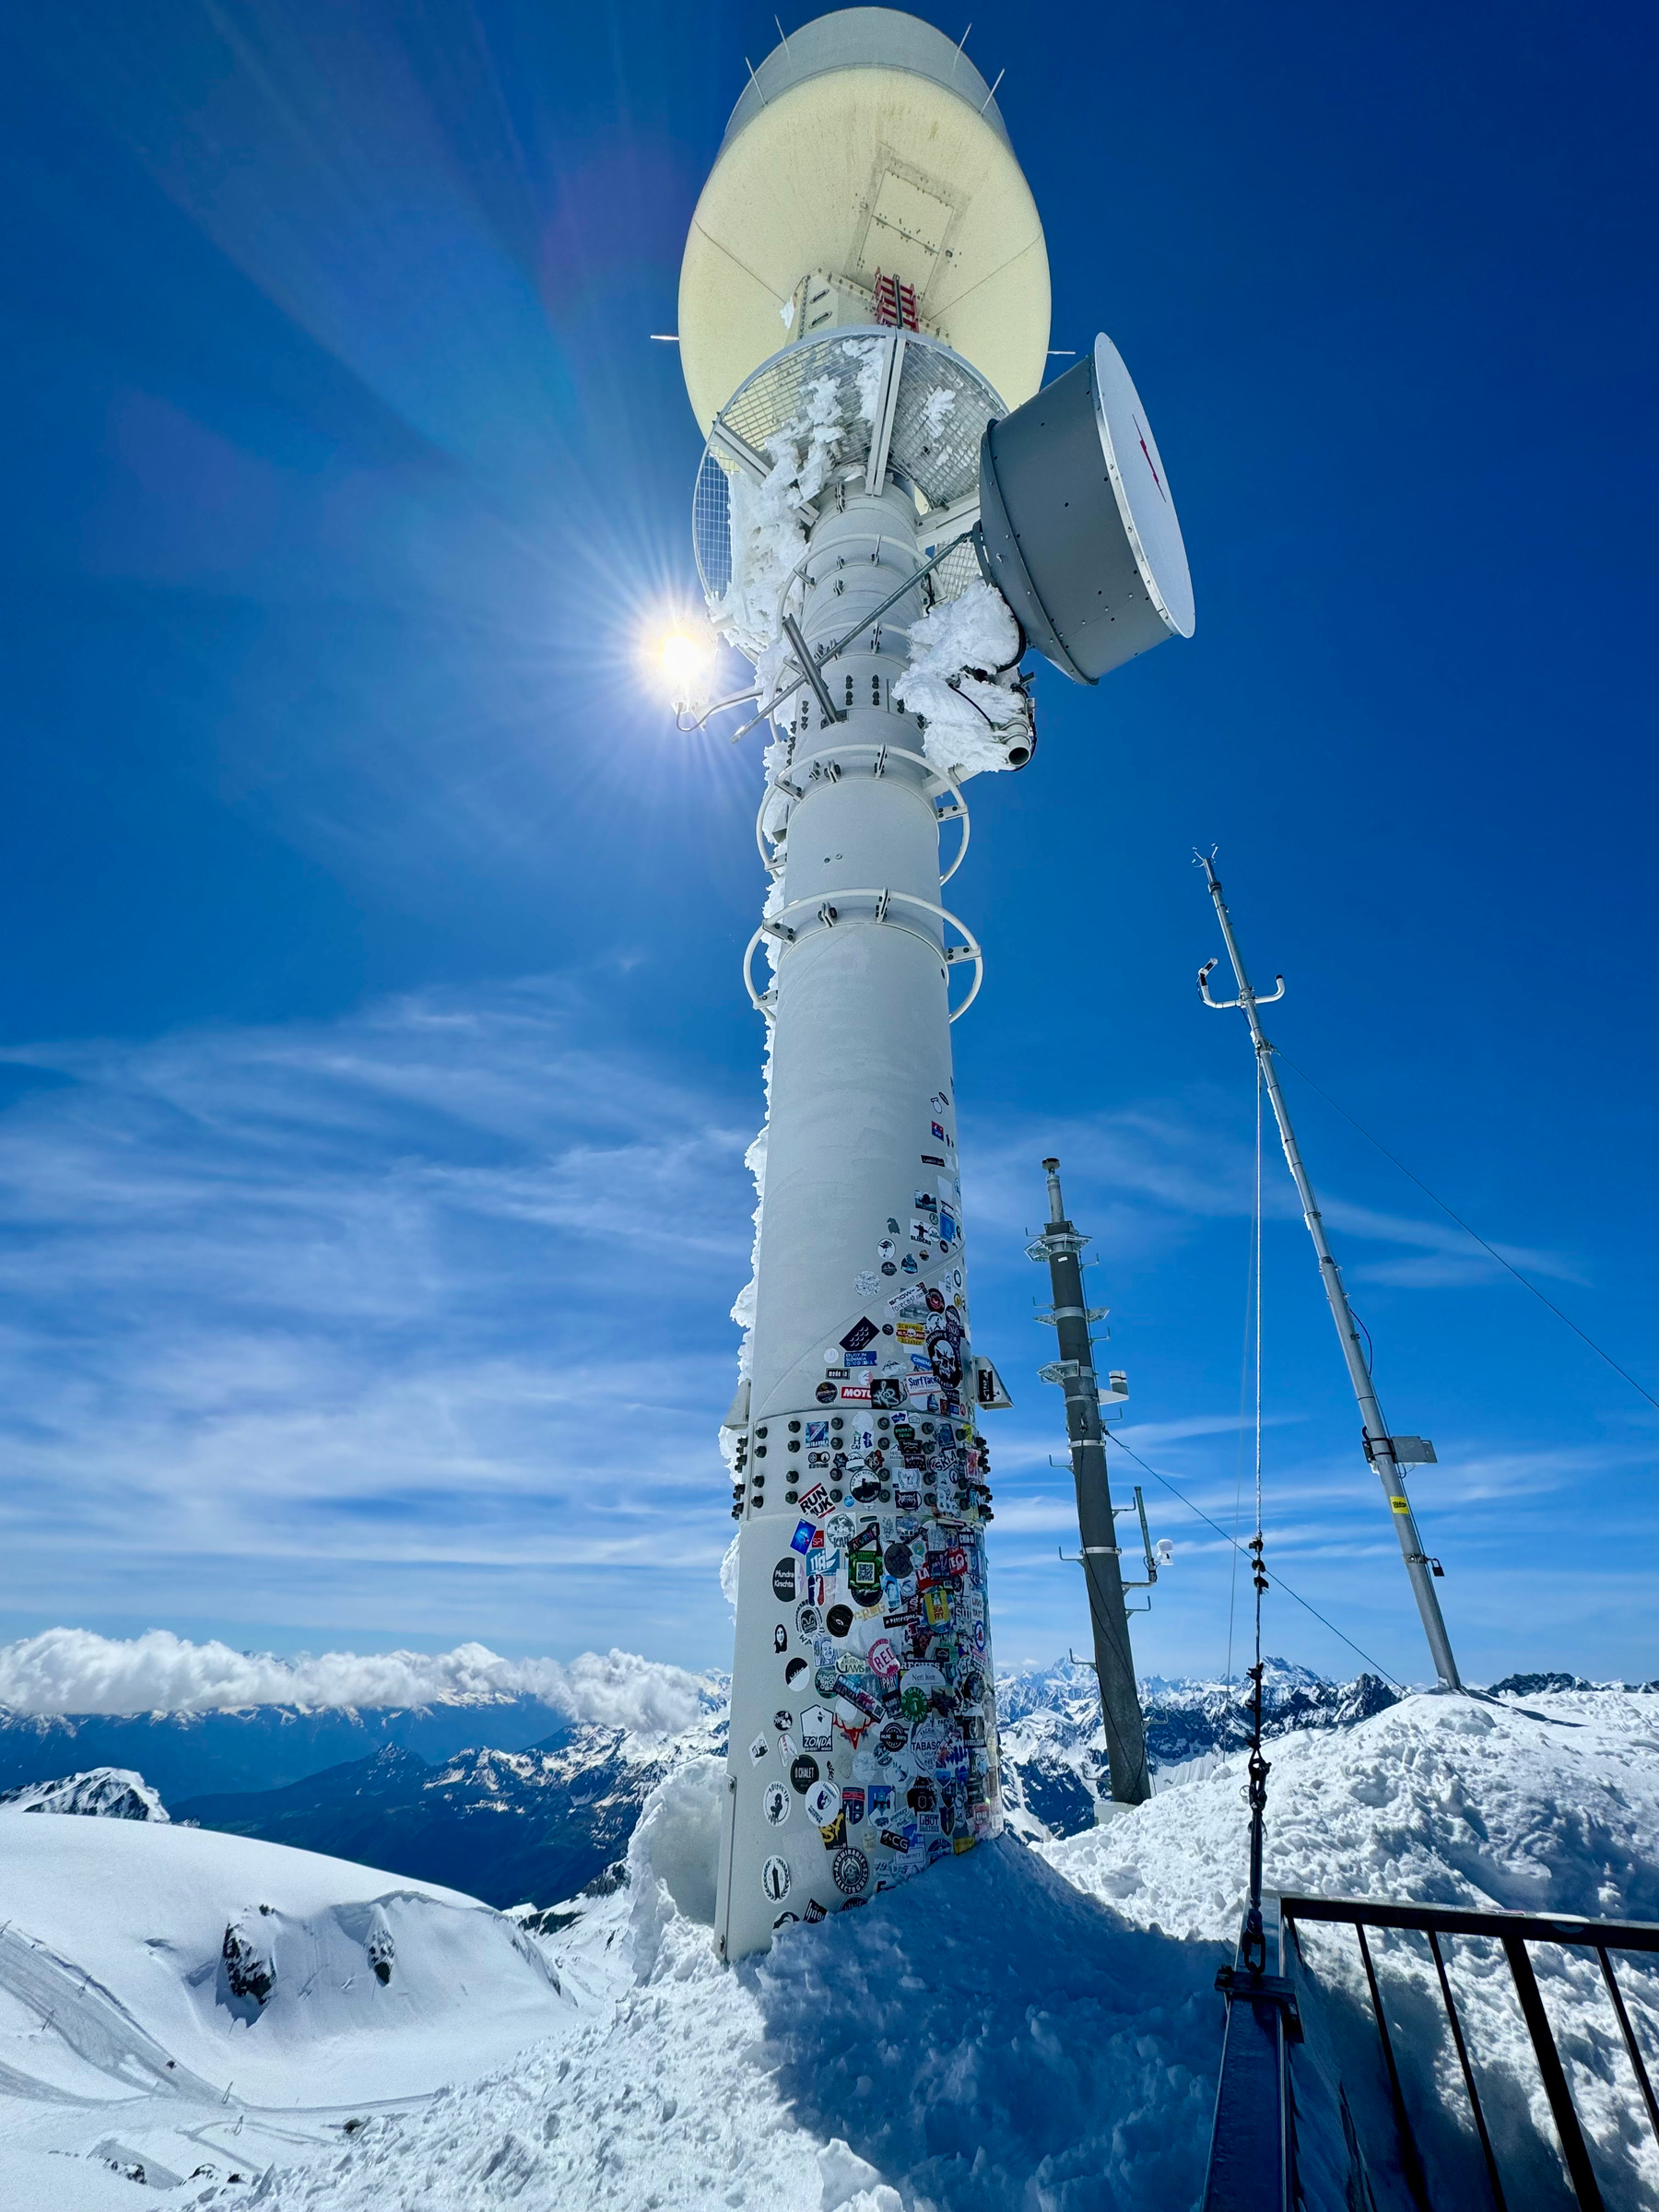 A snow-covered communication tower with numerous stickers on it, set against a clear blue sky with the sun peeking out, surrounded by a snowy mountainous landscape.